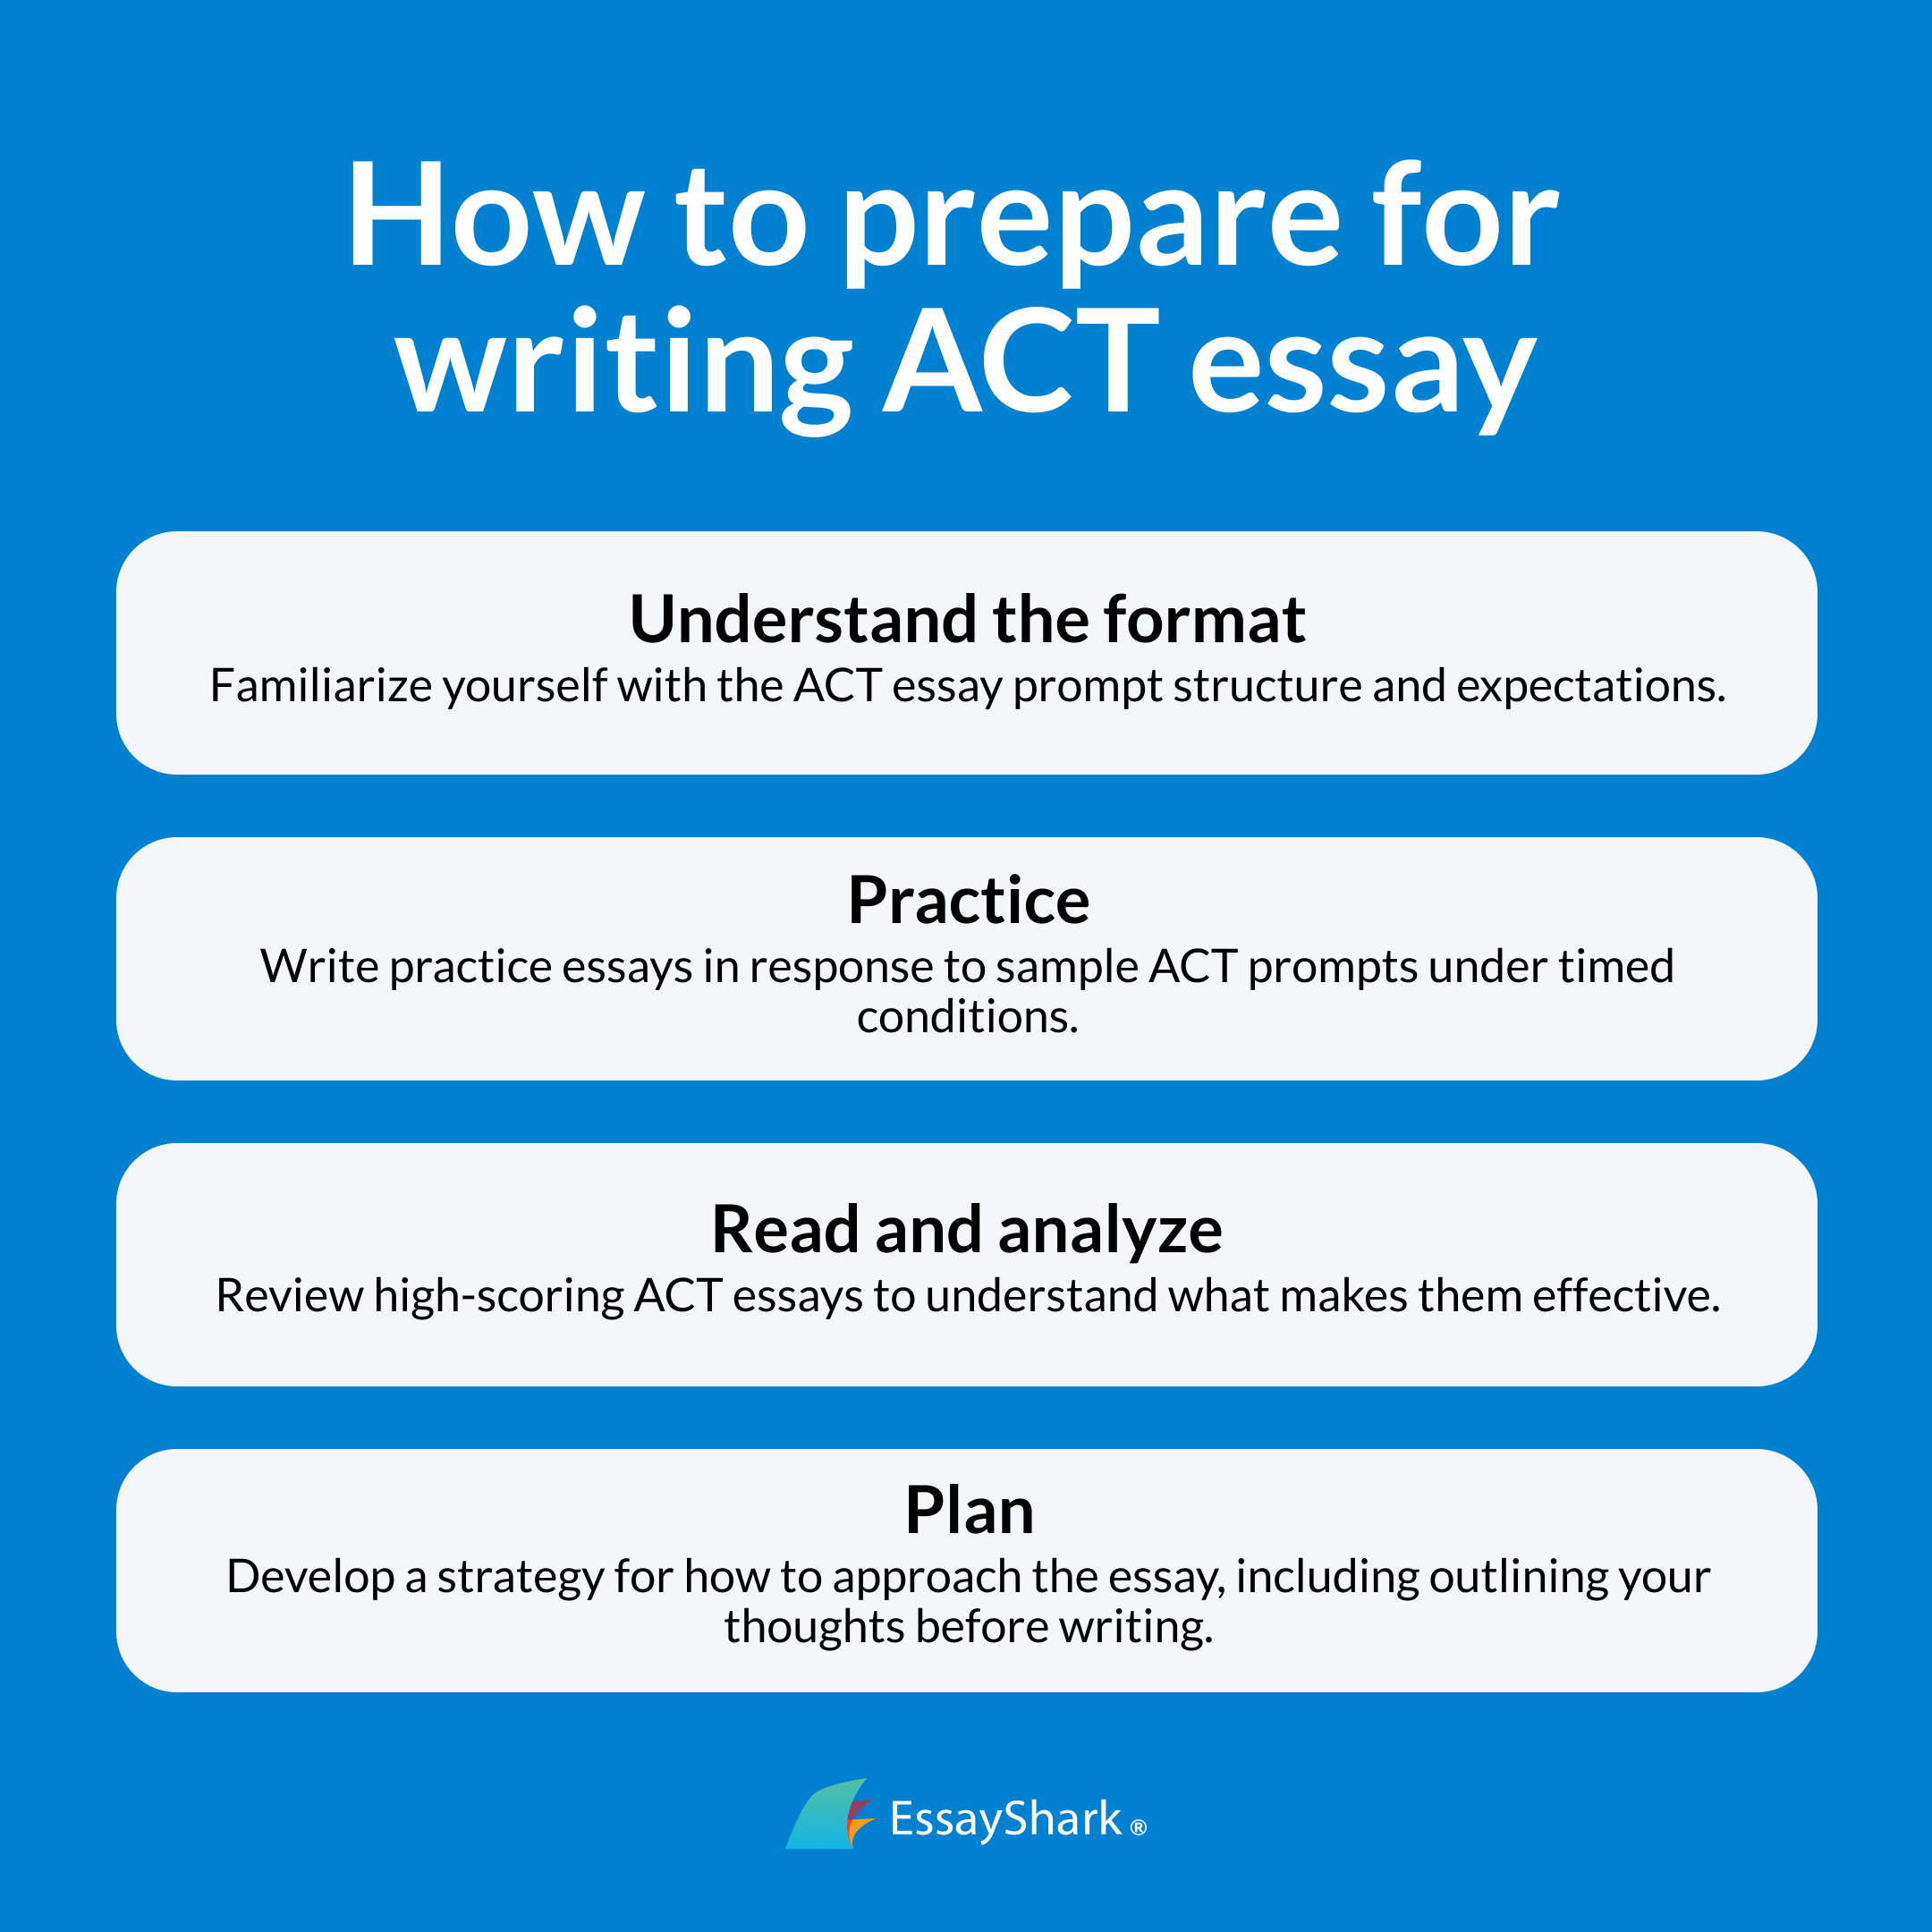 How to Prepare for Writing ACT Essay